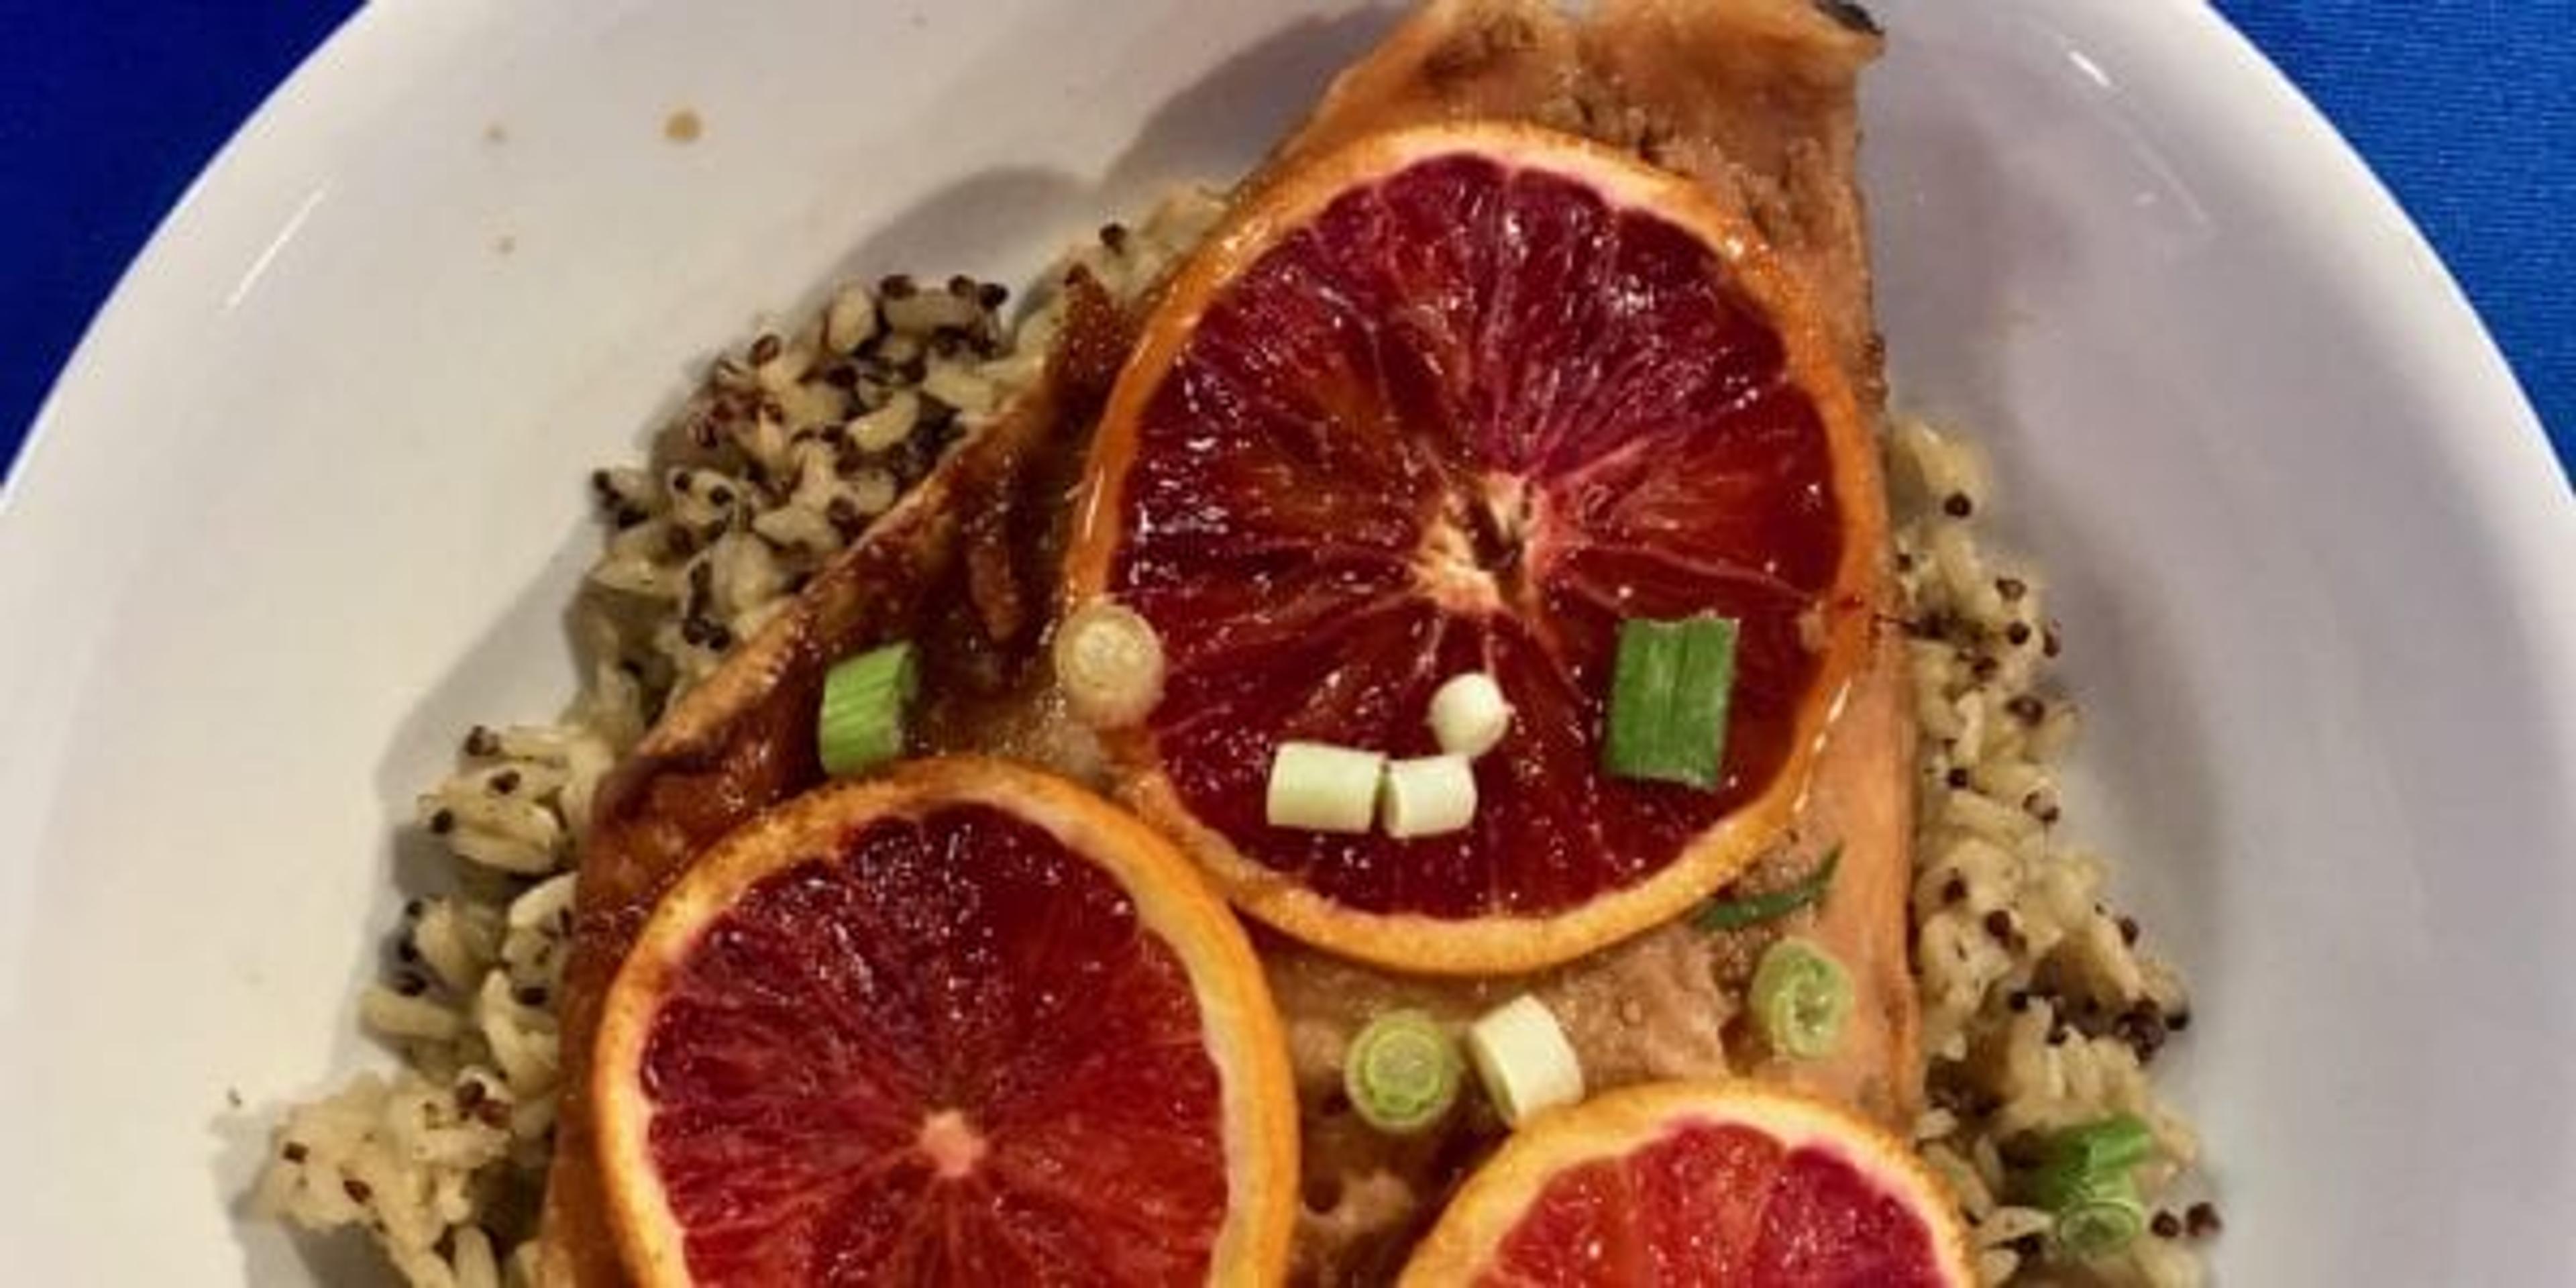 Salmon on a plate with blood oranges.